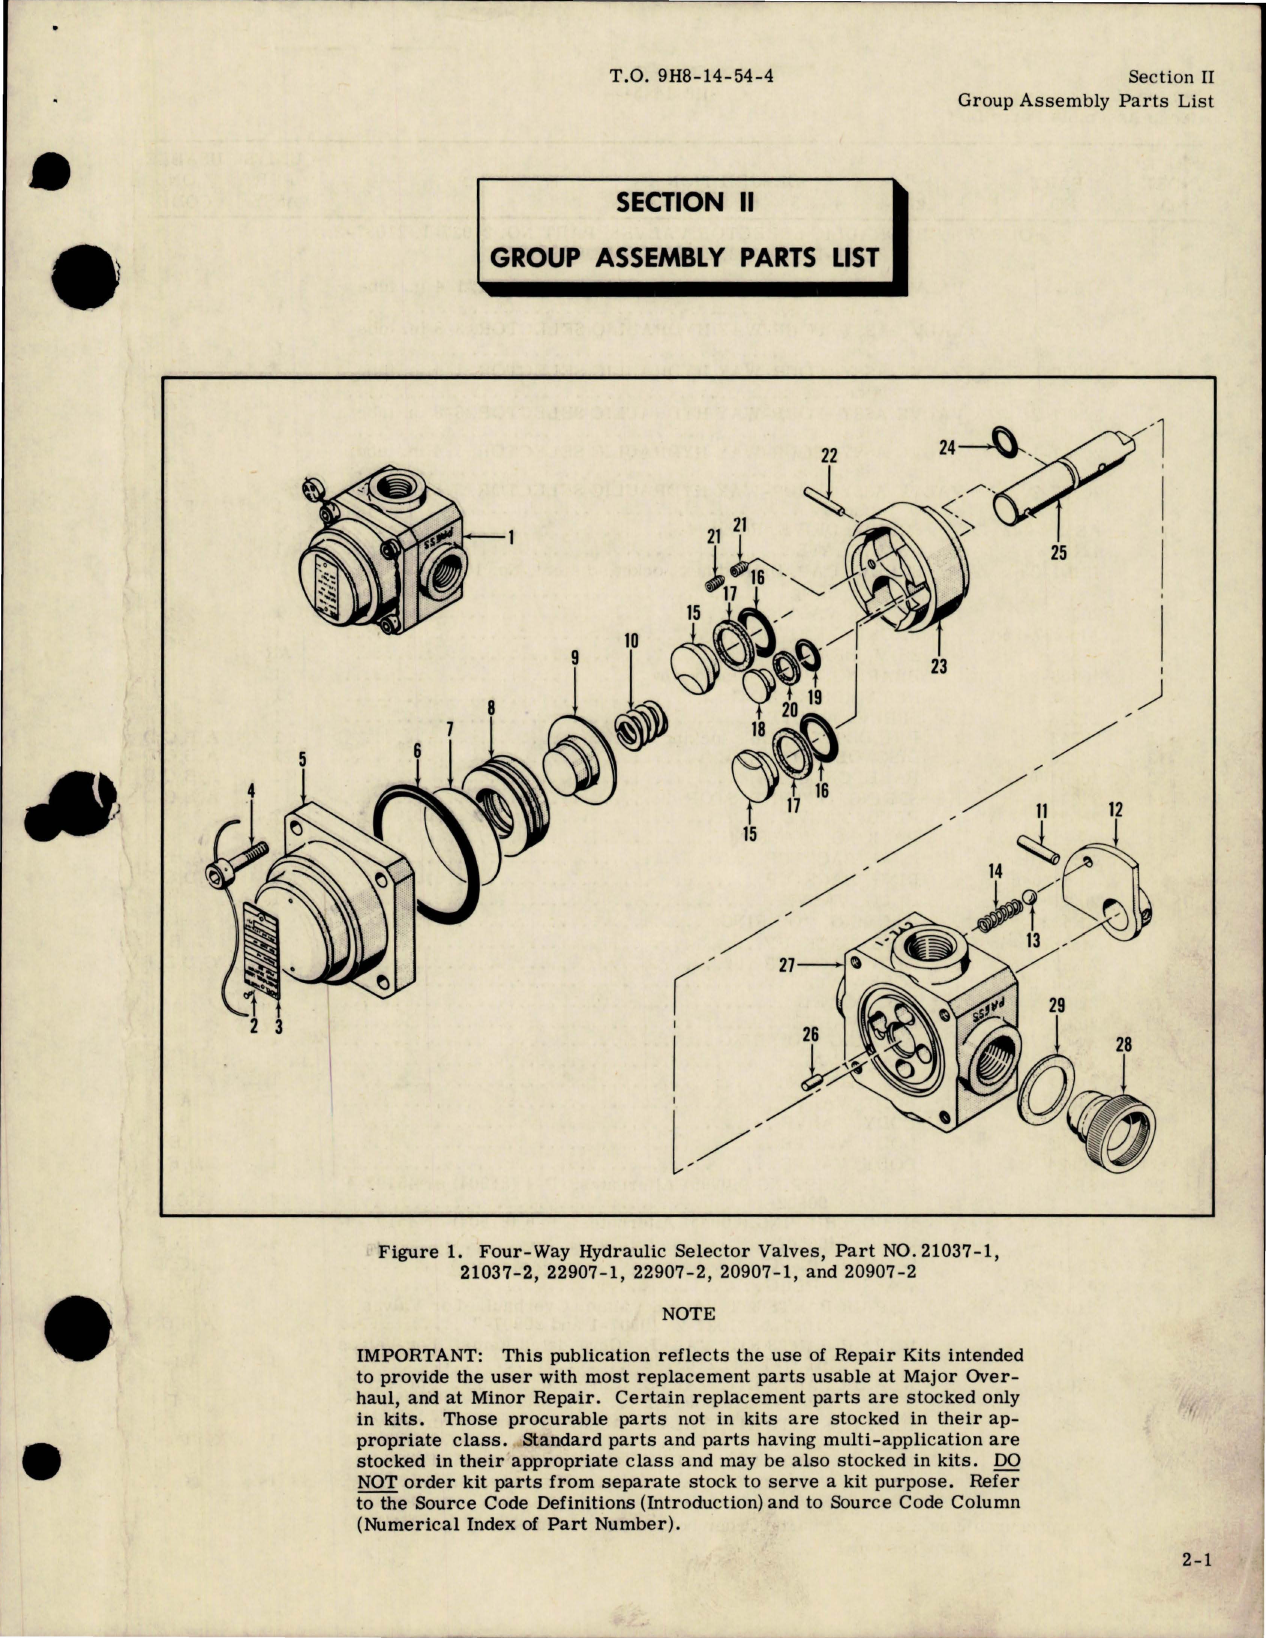 Sample page 7 from AirCorps Library document: Illustrated Parts Breakdown for Four-Way Hydraulic Selector Valves 